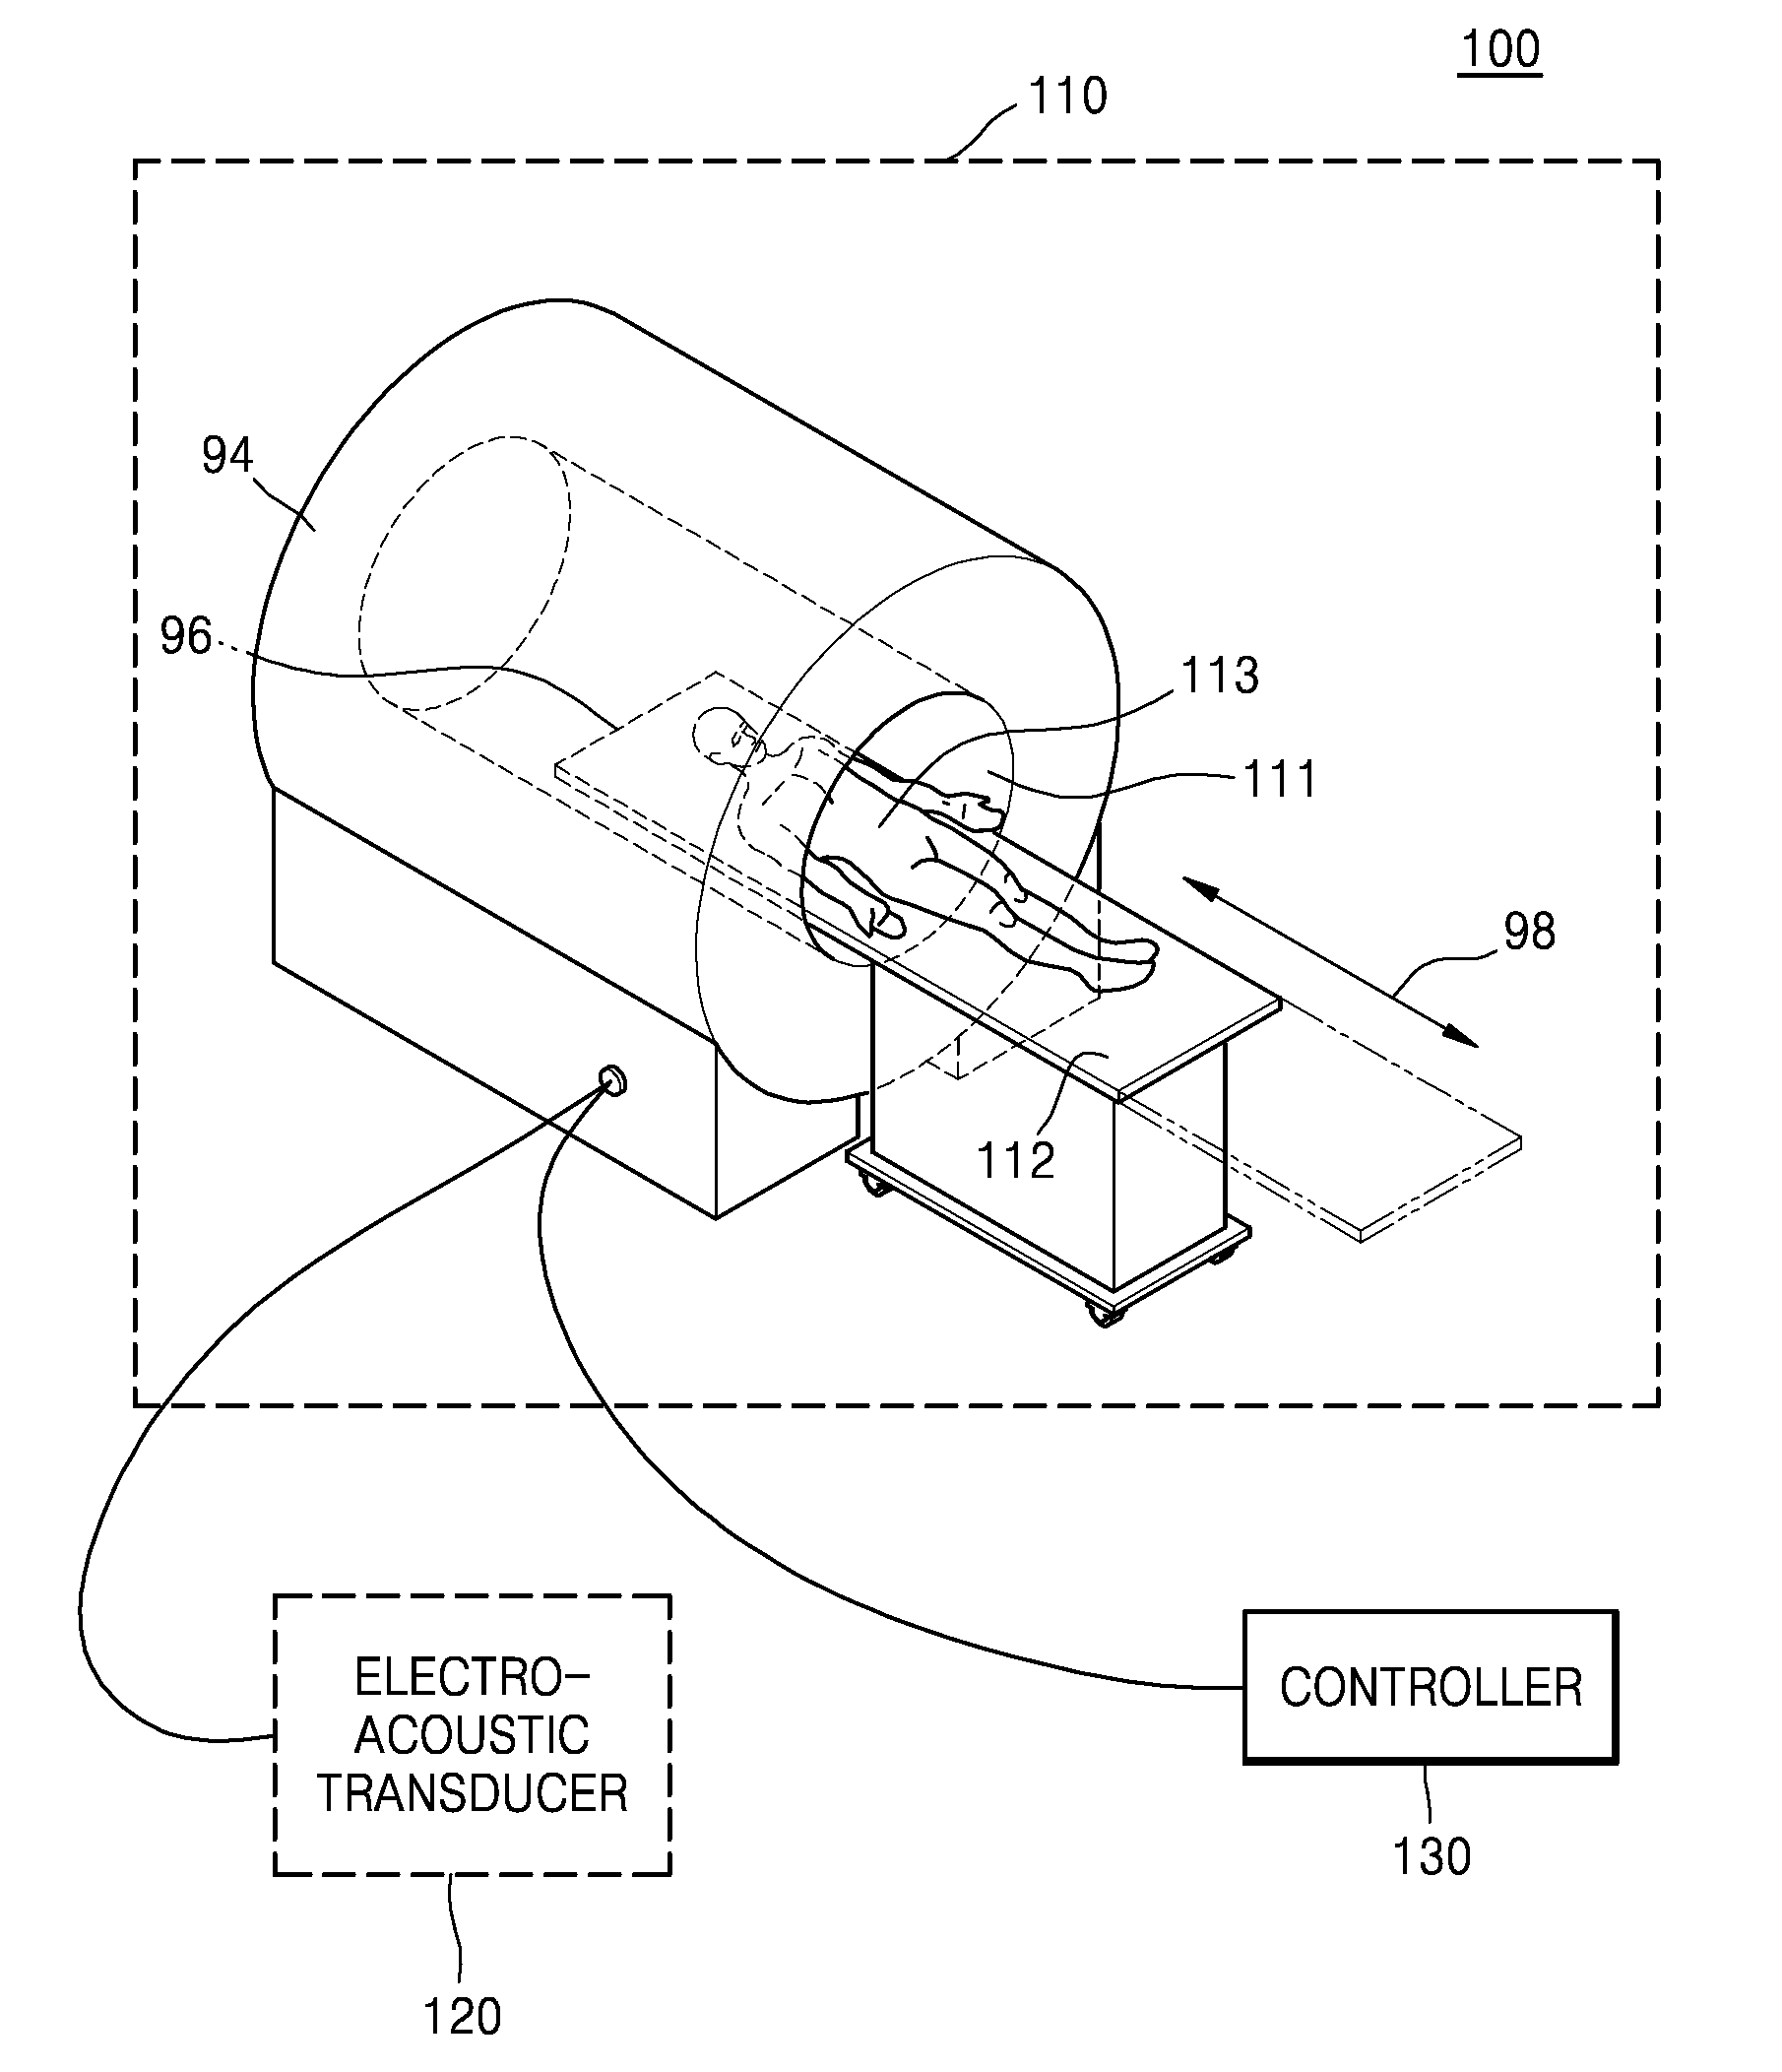 MRI acoustic system, acoustic output device, and electro-acoustic transducer